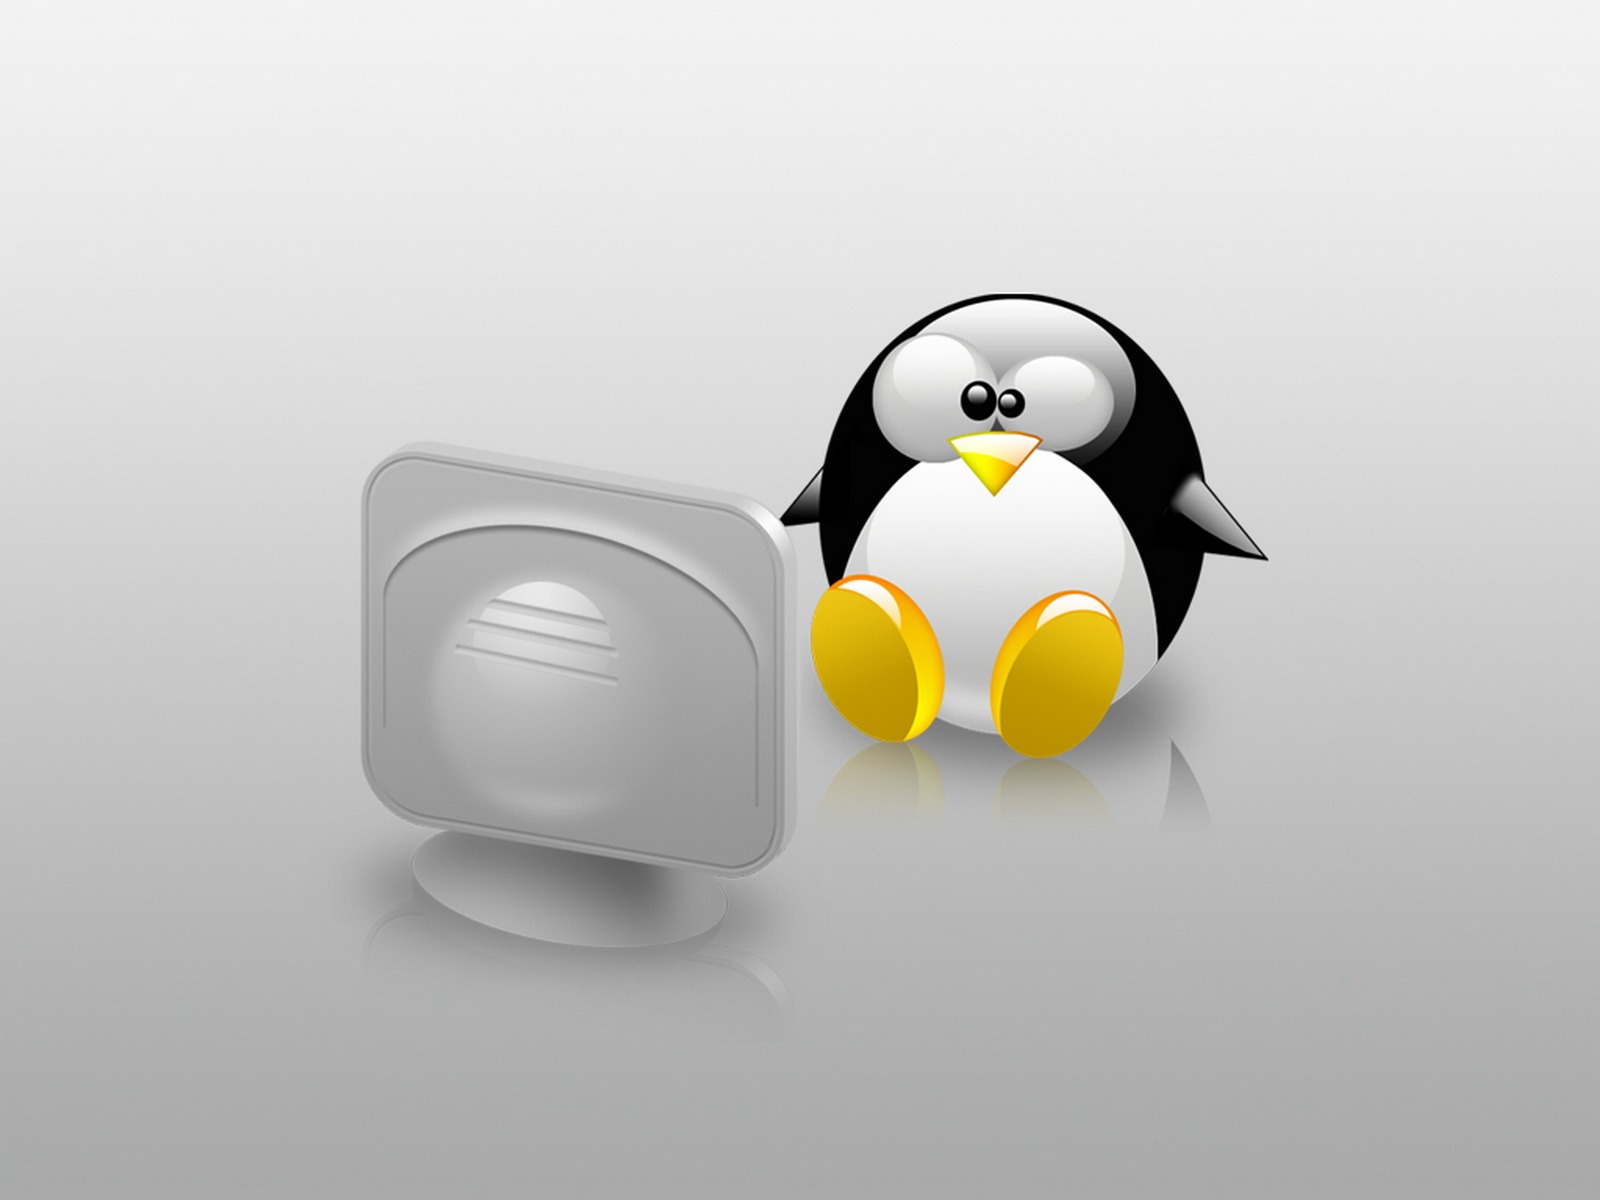 Linux tapety (3) #13 - 1600x1200